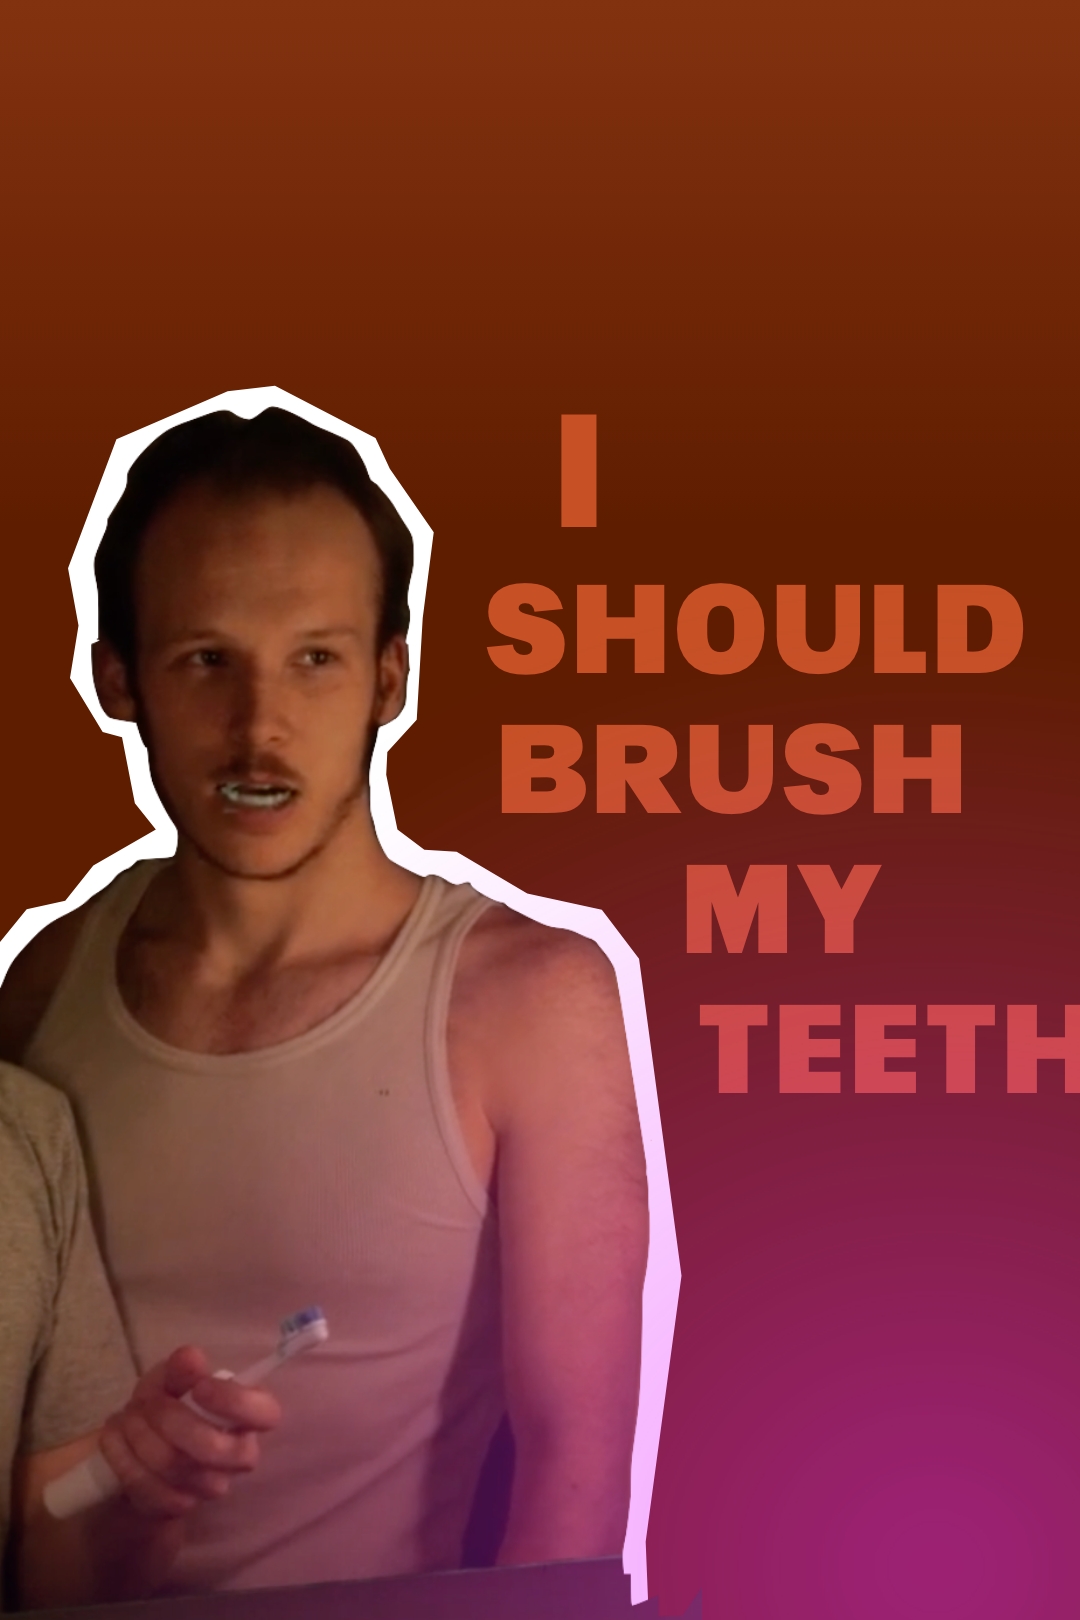 Poster for the film "I Should Brush My Teeth"